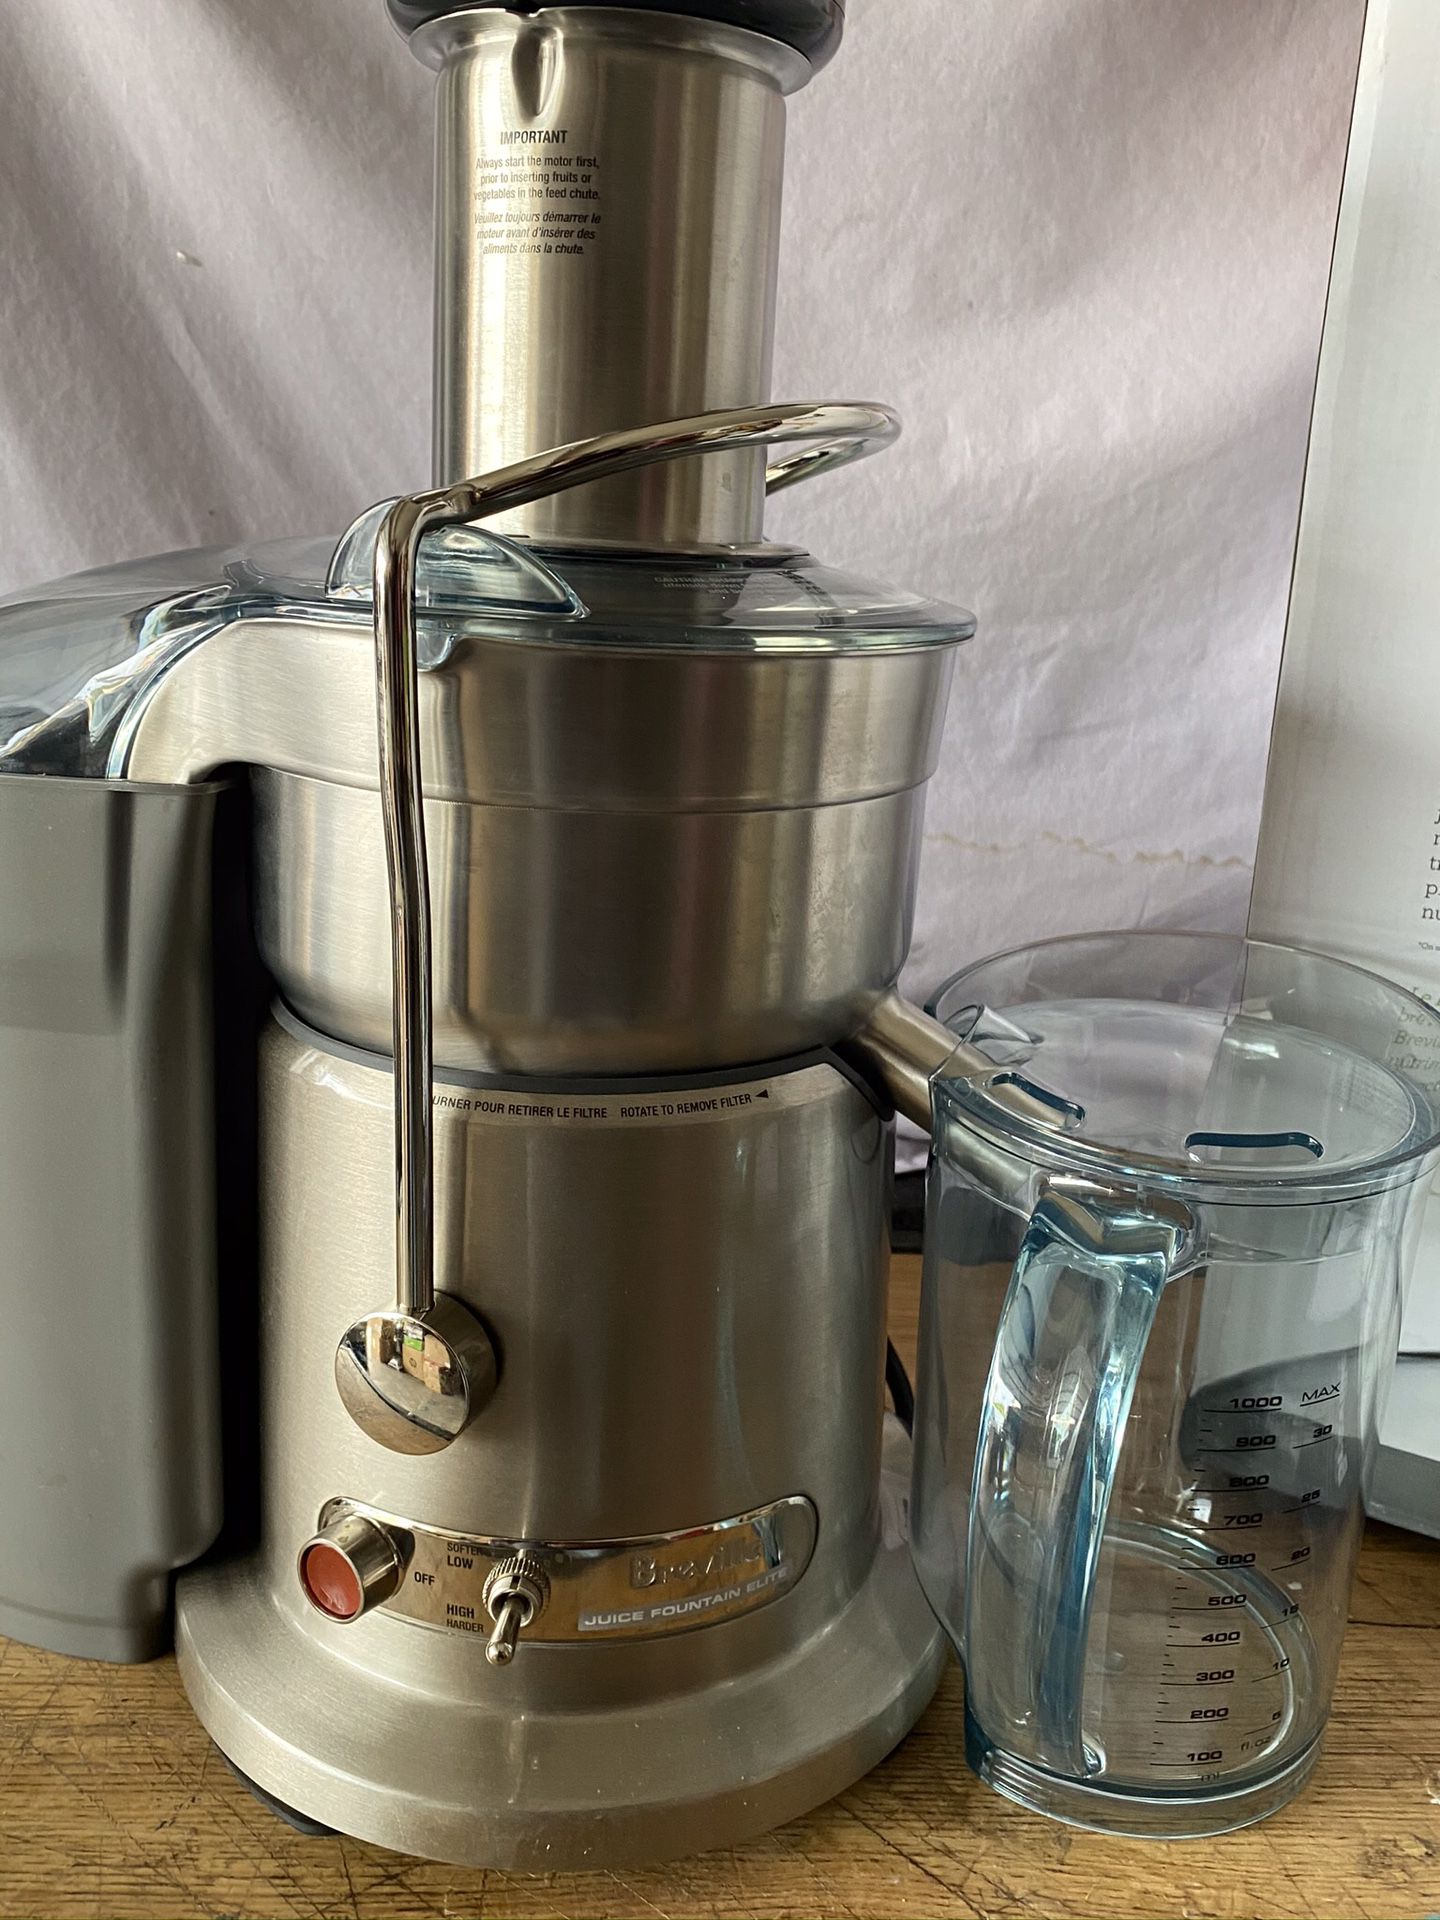 Breville the juice fountain Elite stainless steel / machine new excellent condition open box all accessories included in original packaging packaging